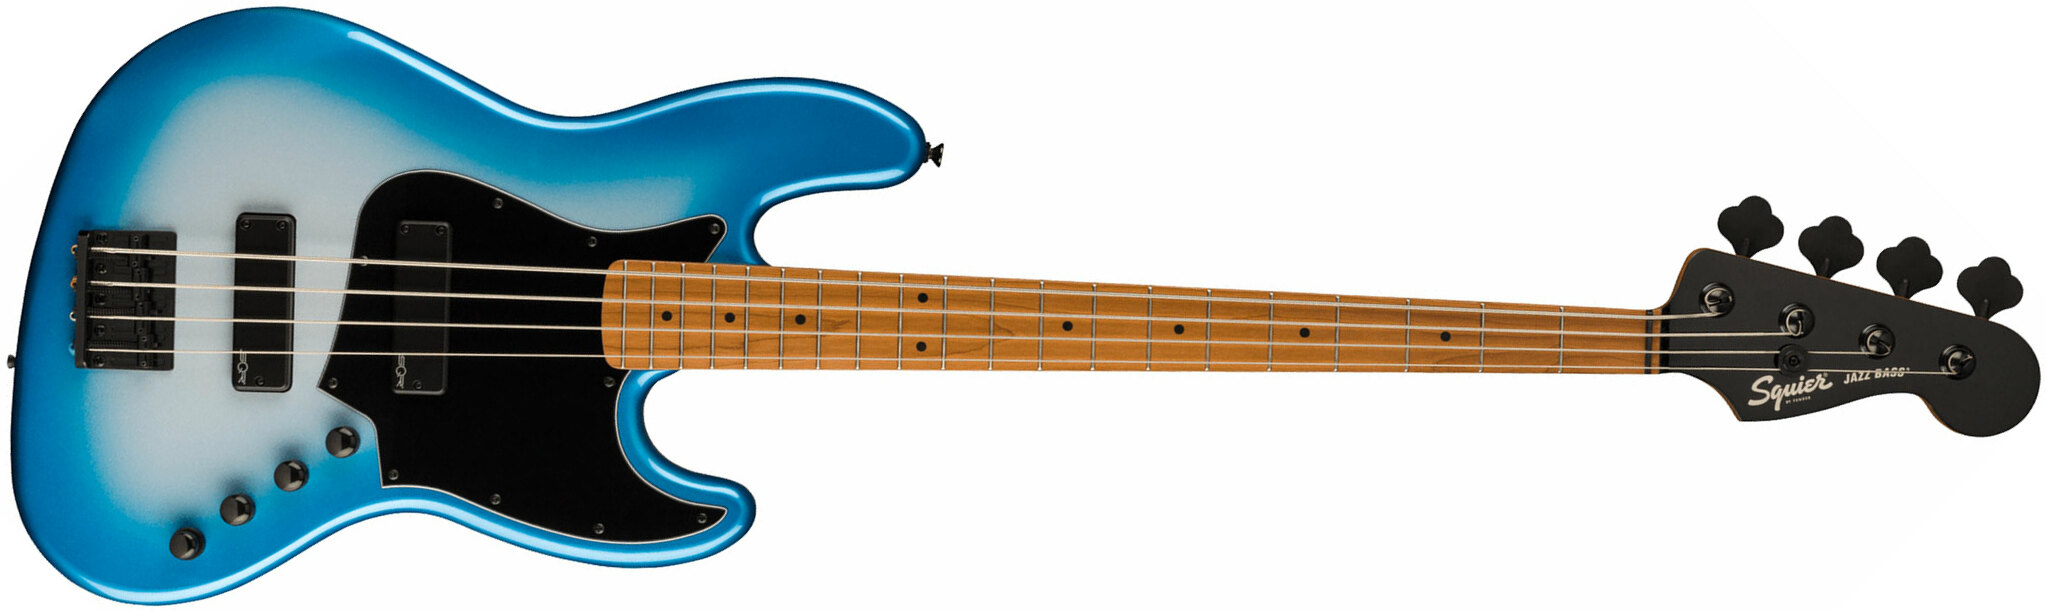 Squier Jazz Bass Contemporary Active Hh Mn - Sky Burst Metallic - Solid body electric bass - Main picture